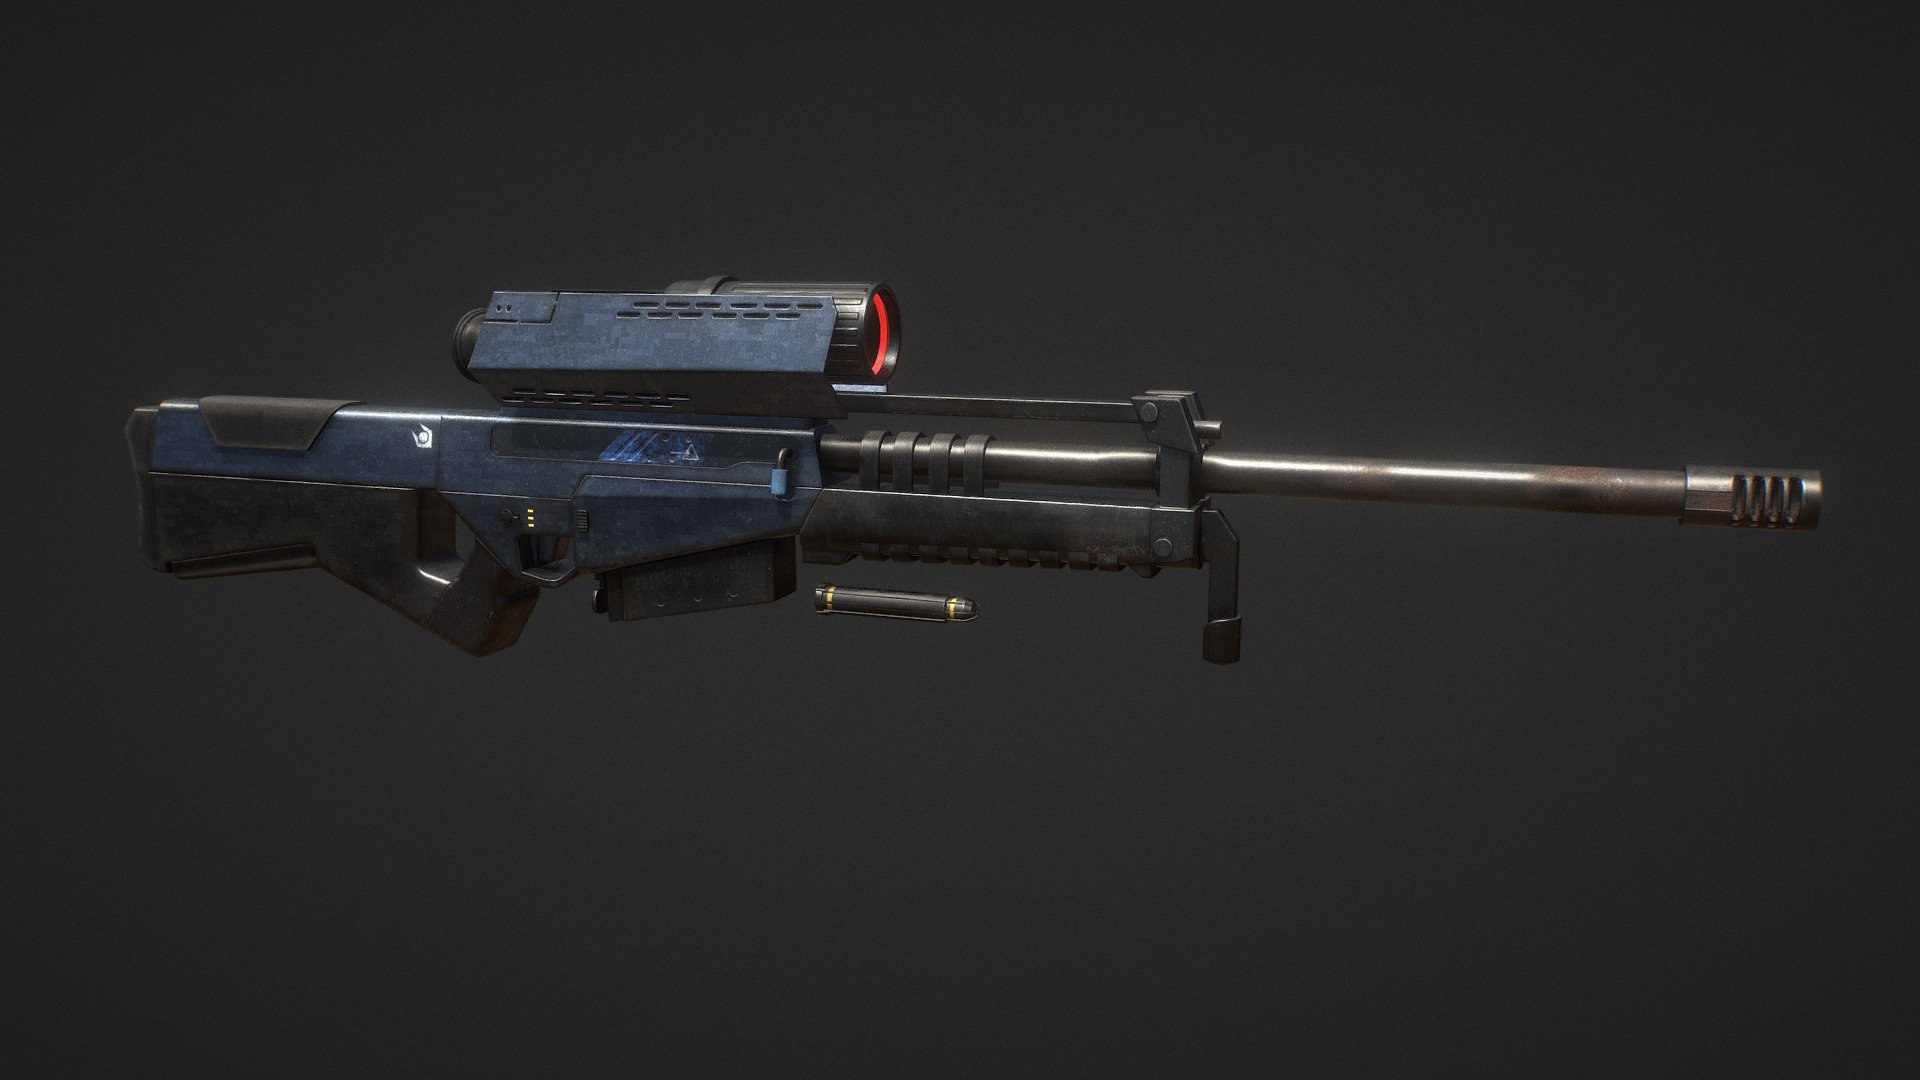 A work that I did for half life mod by VANCE dev team. I responsible for modeling, texturing, UV mapping, rendering.
Poly: 9.6K tris
Textures: 2K - Combine Sniper Rifle from Half Life - Buy Royalty Free 3D model by itsyourbuddy (@rezawicaksono) 3d model